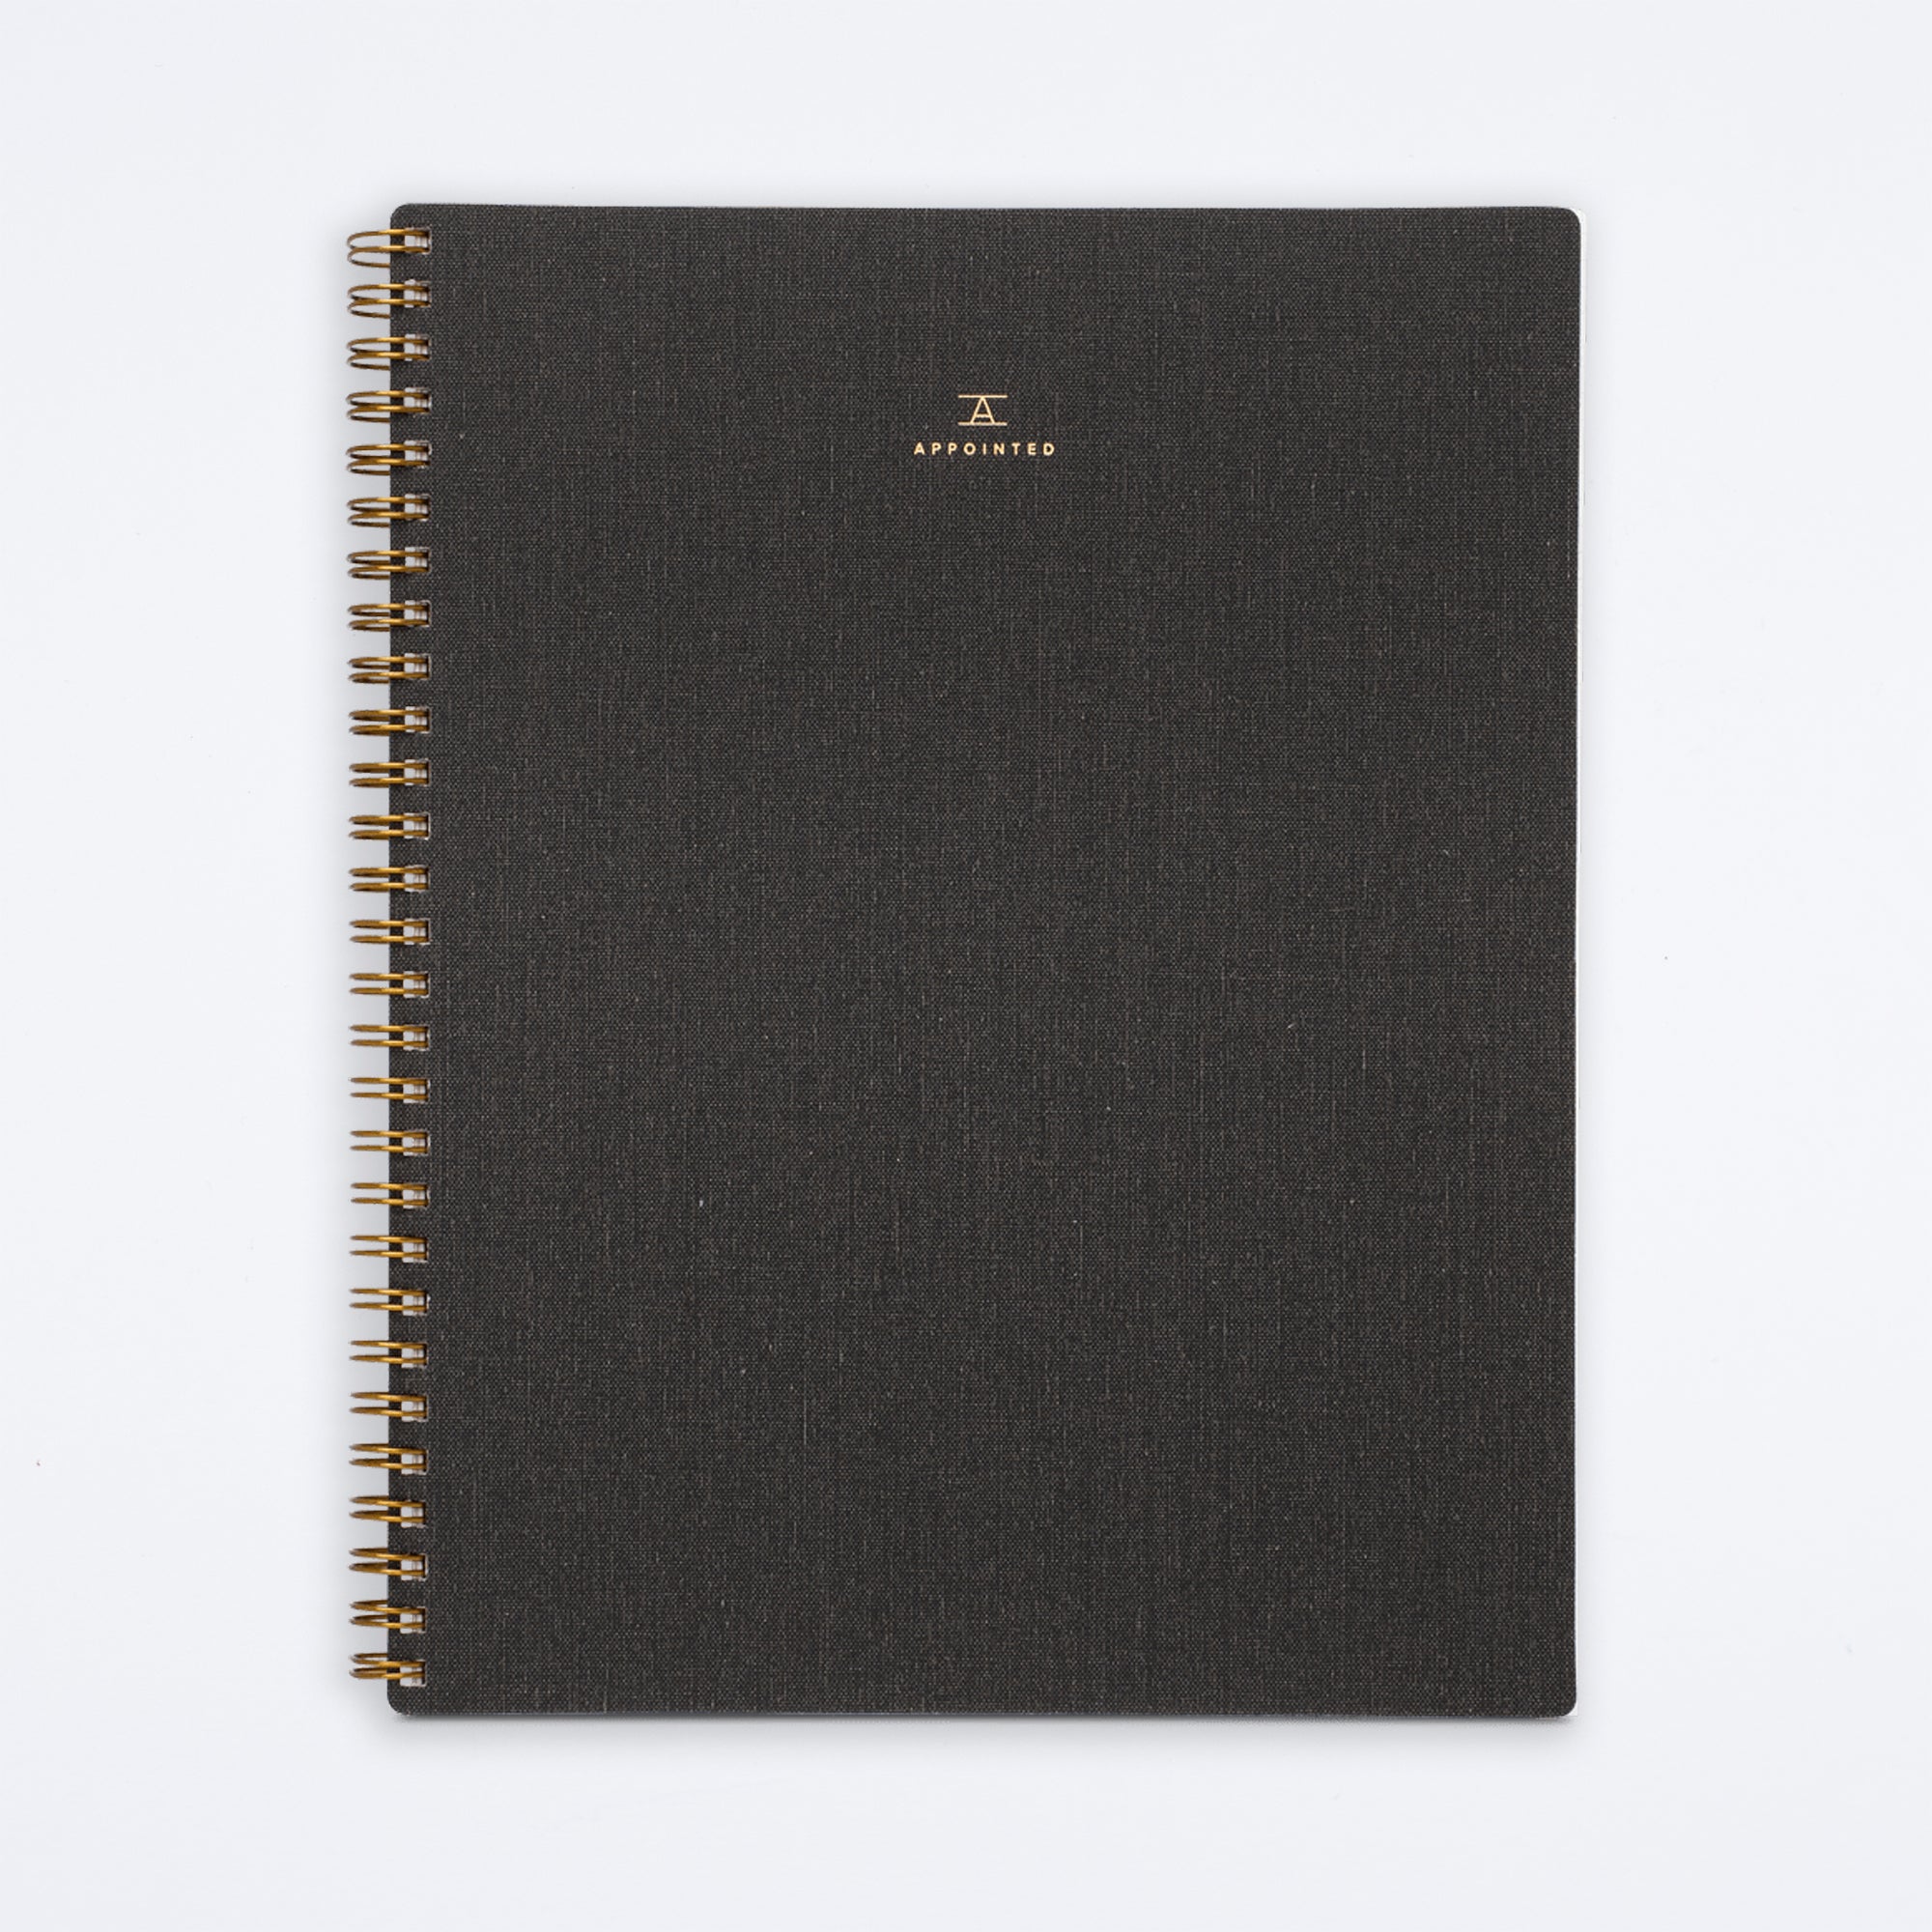 Charcoal Gray Lined Notebook